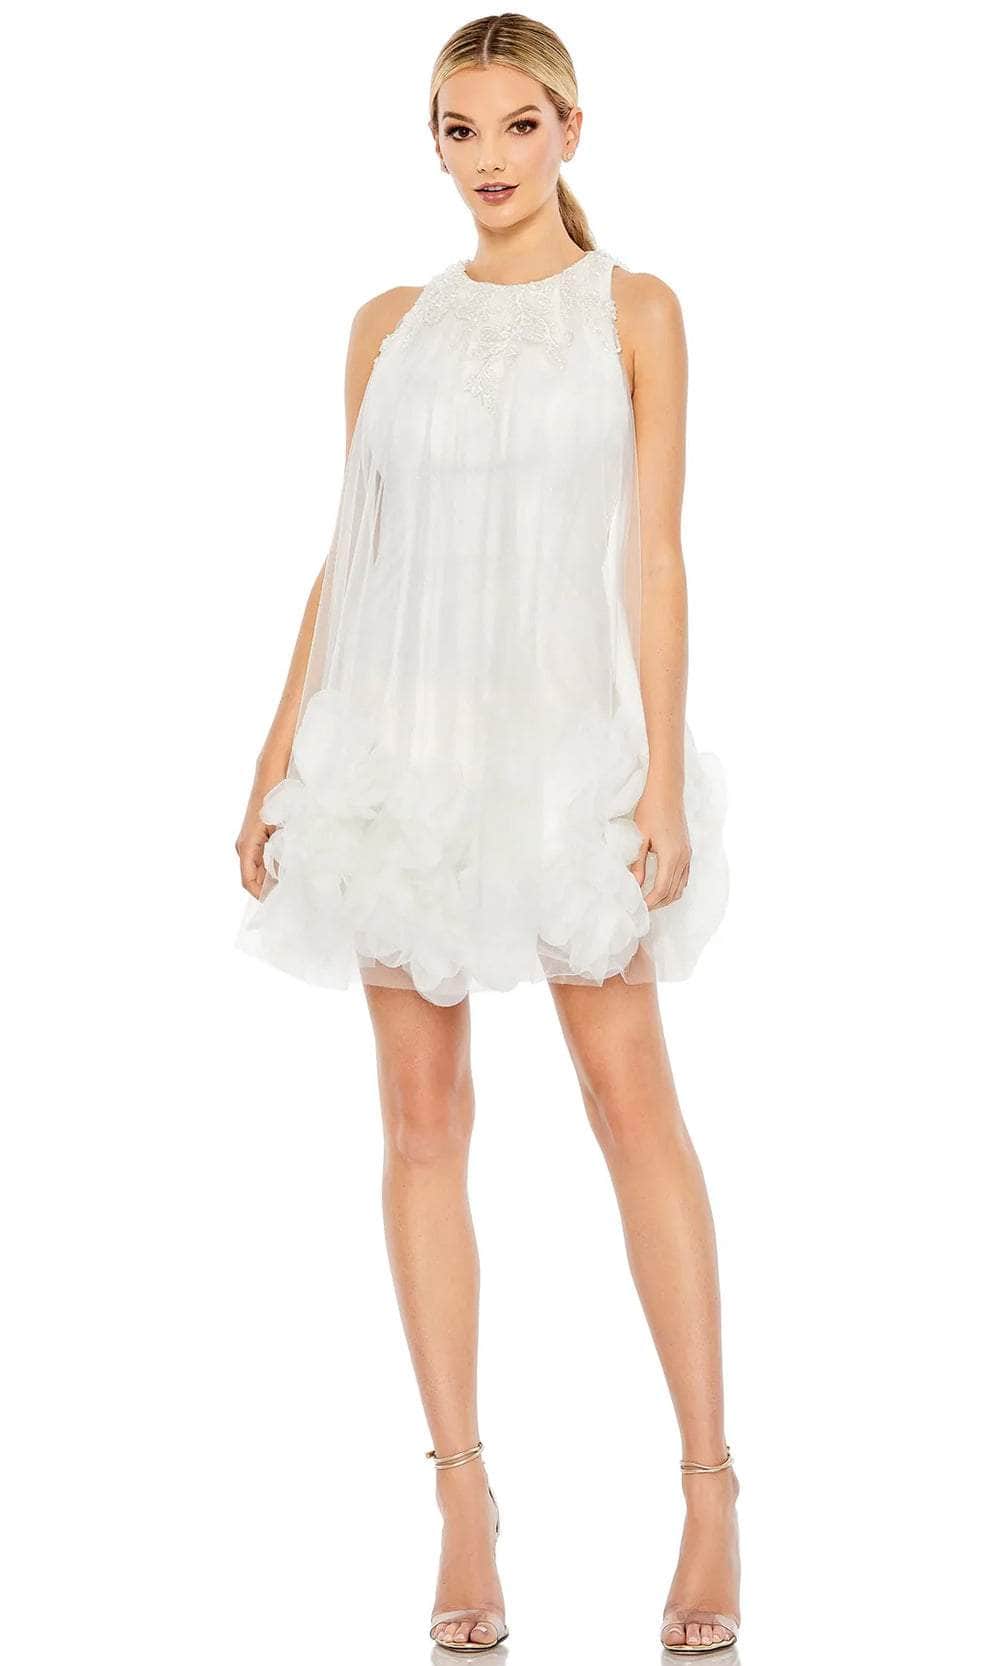 Mac Duggal 11294 - Ruffled Tulle Overlay Cocktail Dress Cocktail Dresses 0 / White